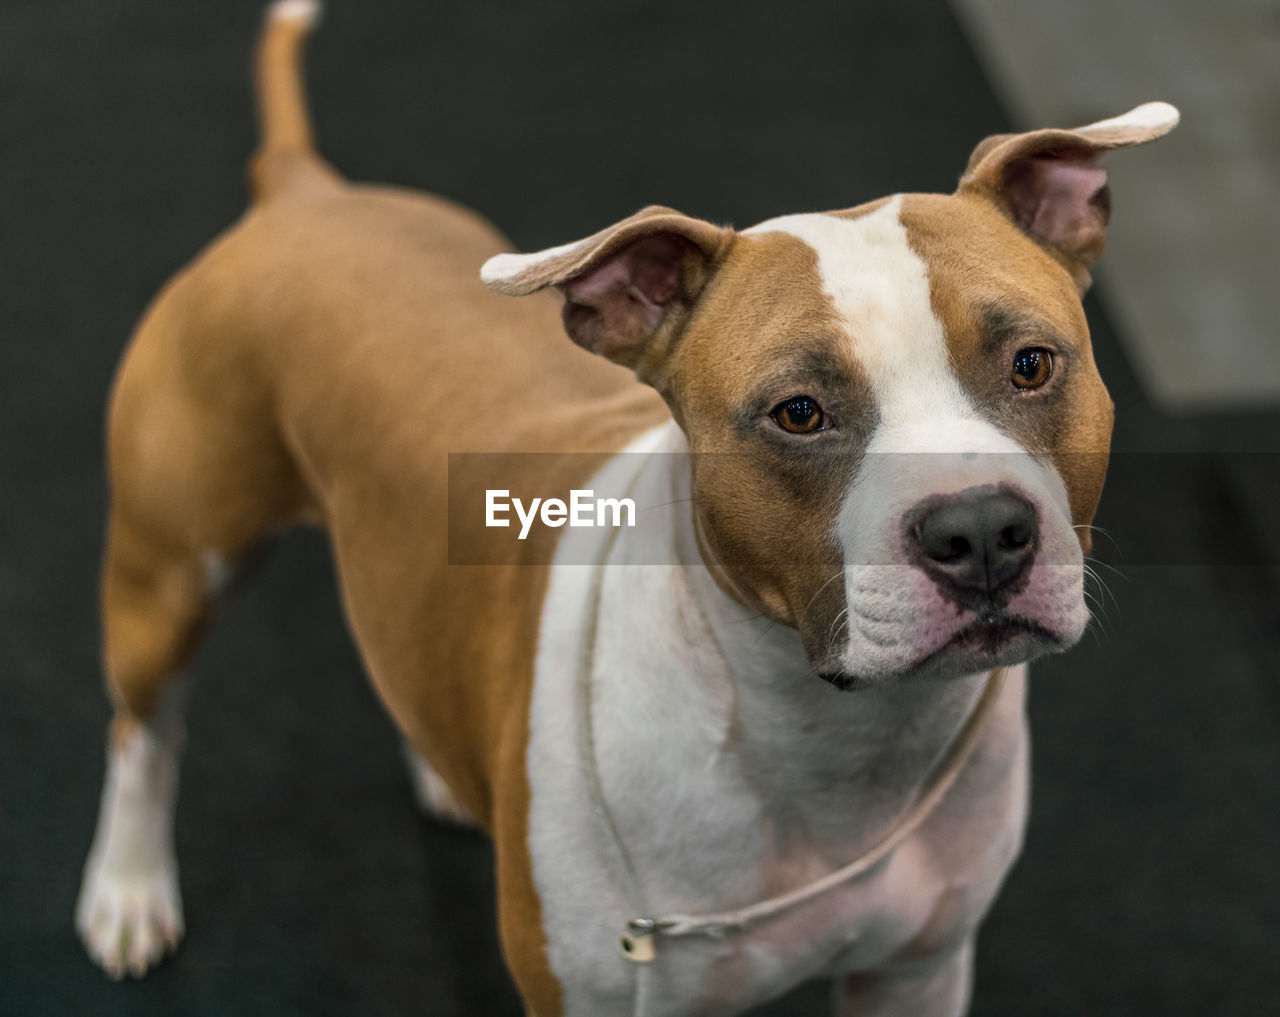 pet, dog, mammal, animal themes, animal, domestic animals, one animal, canine, terrier, portrait, carnivore, looking at camera, focus on foreground, no people, standing, american staffordshire terrier, boxer - dog, collar, bulldog